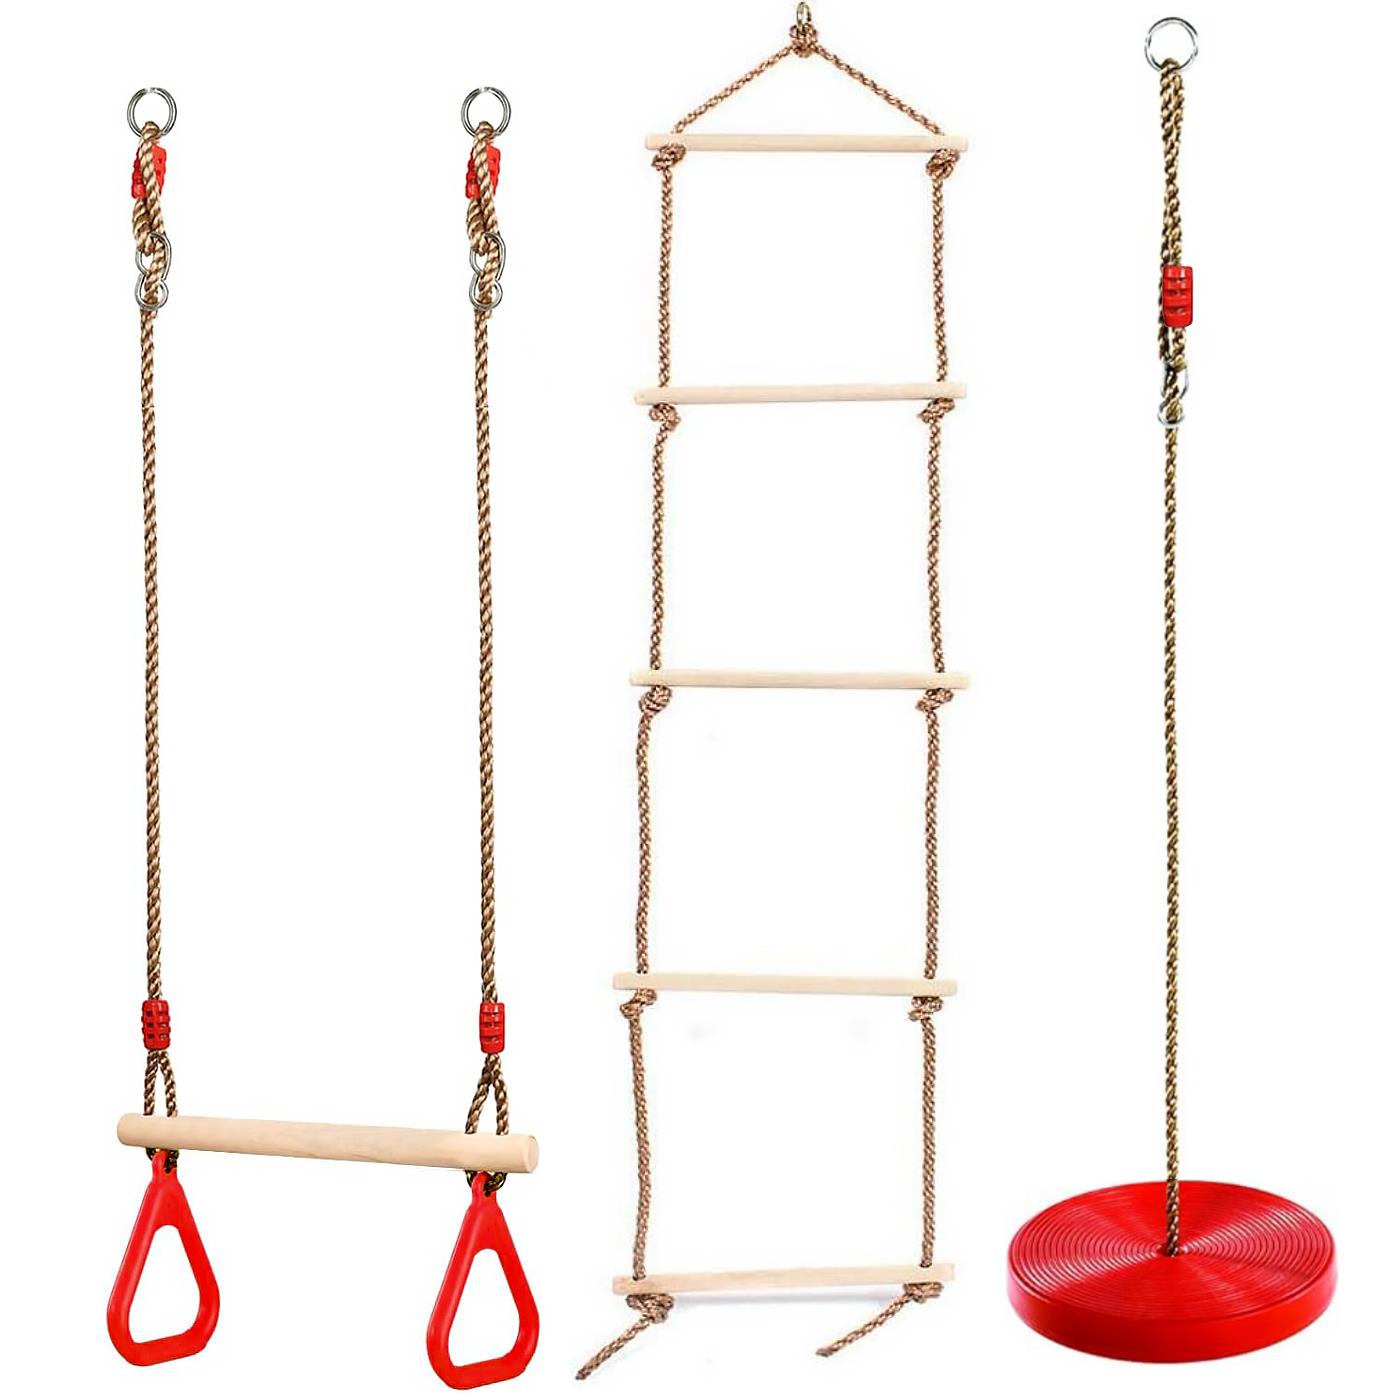 The Magic Toy Shop Wooden Trapeze Swing, Rope Ladder & Red Plate Seat